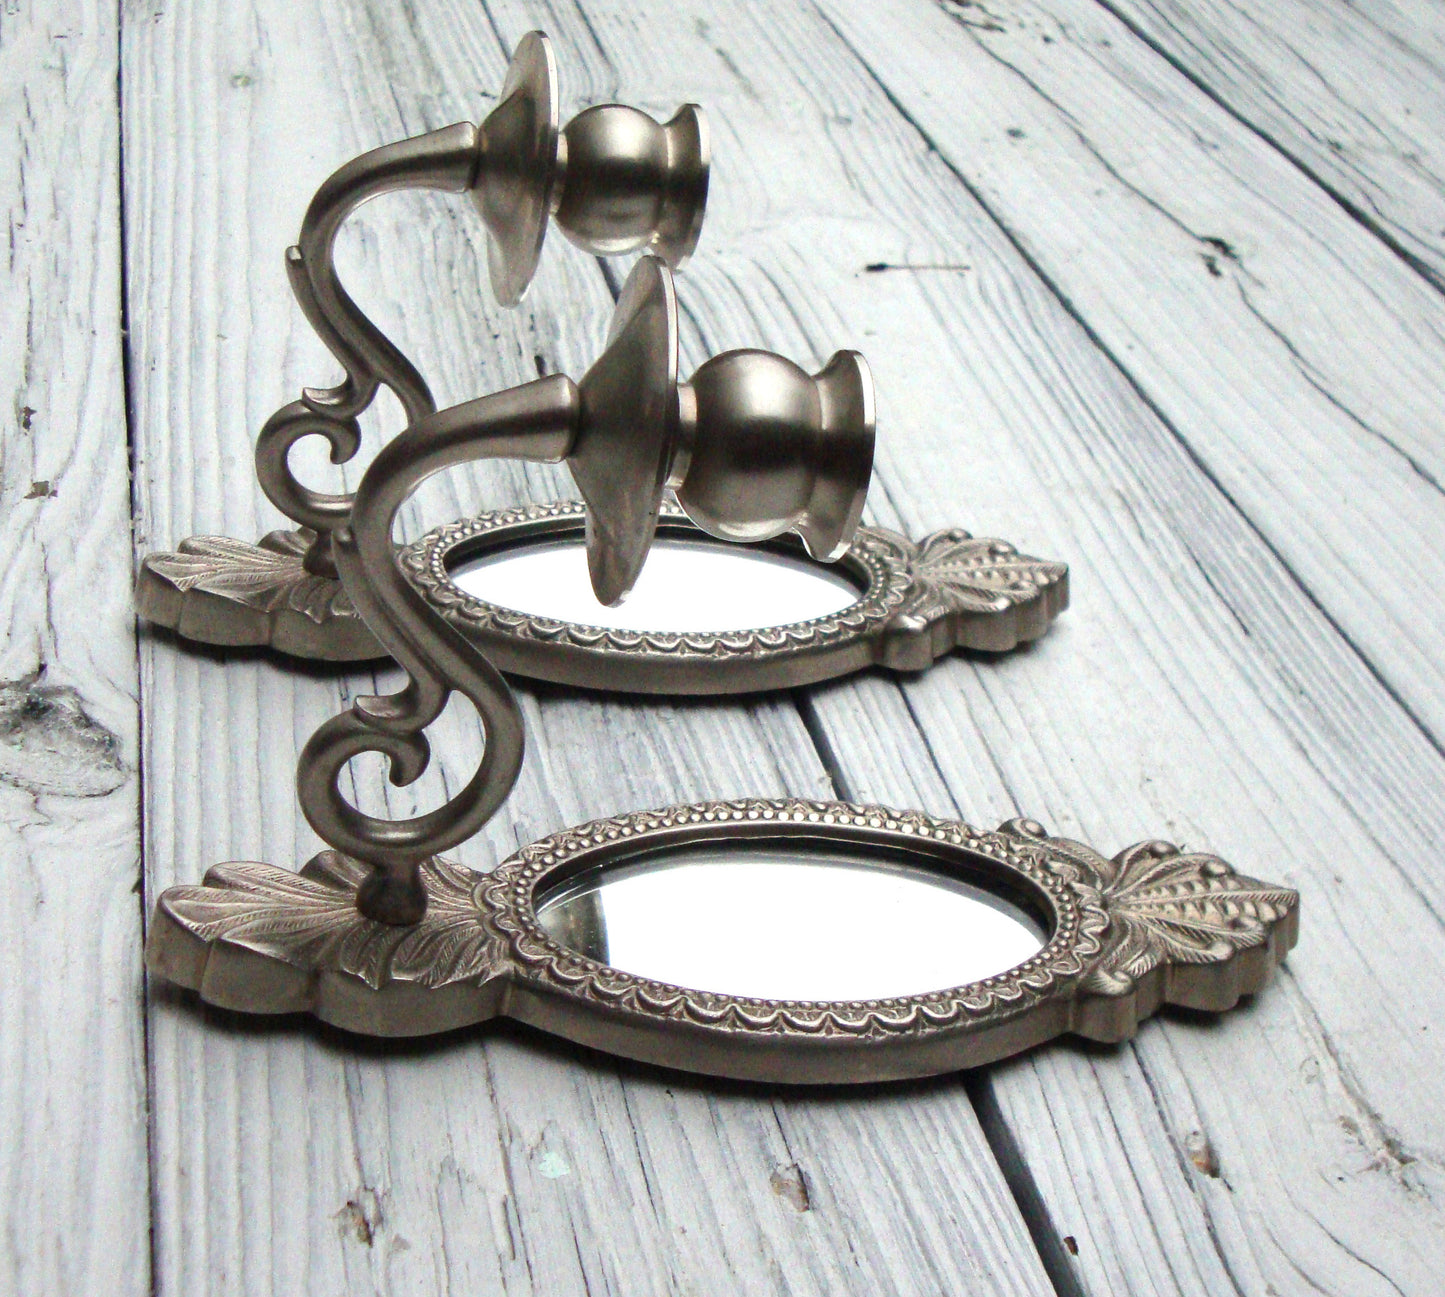 [Sold] Vintage Gustavian Swedish Silver Mirror Candle Sconces - 2